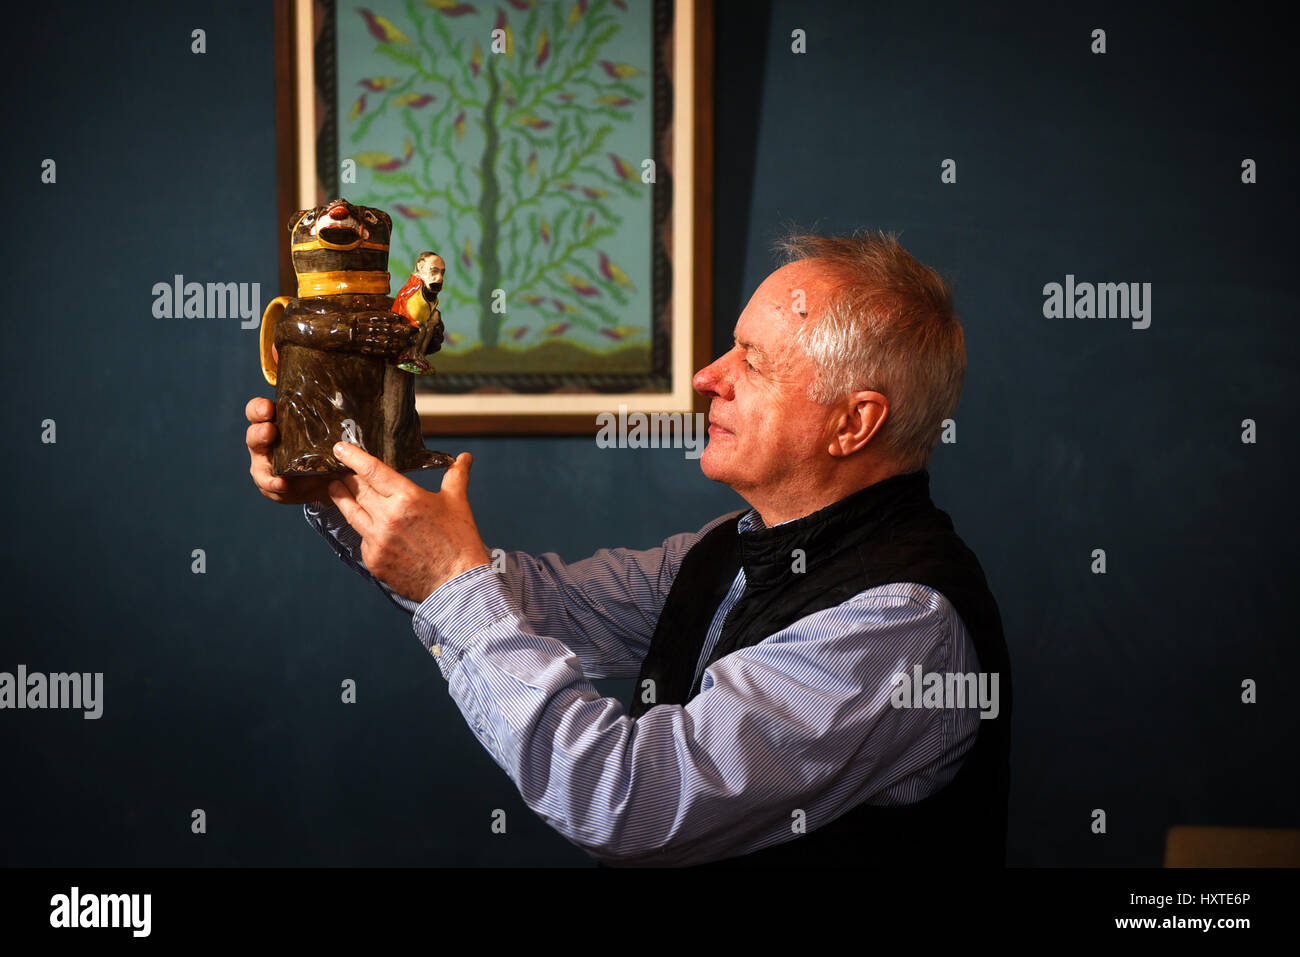 Oxford, UK. 29th Mar, 2017. Antique dealers setting up for The Cotswolds Art and Antiques Dealers' Association (CADA) Fair, which runs over the weekend, 30th March - 2nd April at Blenheim Palace, Woodstock, Oxfordshire, UK. John Howard with a porcelain figure of a Russian Bear clutching Napoleon. Picture by Richard Cave 29.03.17 Credit: Richard Cave/Alamy Live News Stock Photo